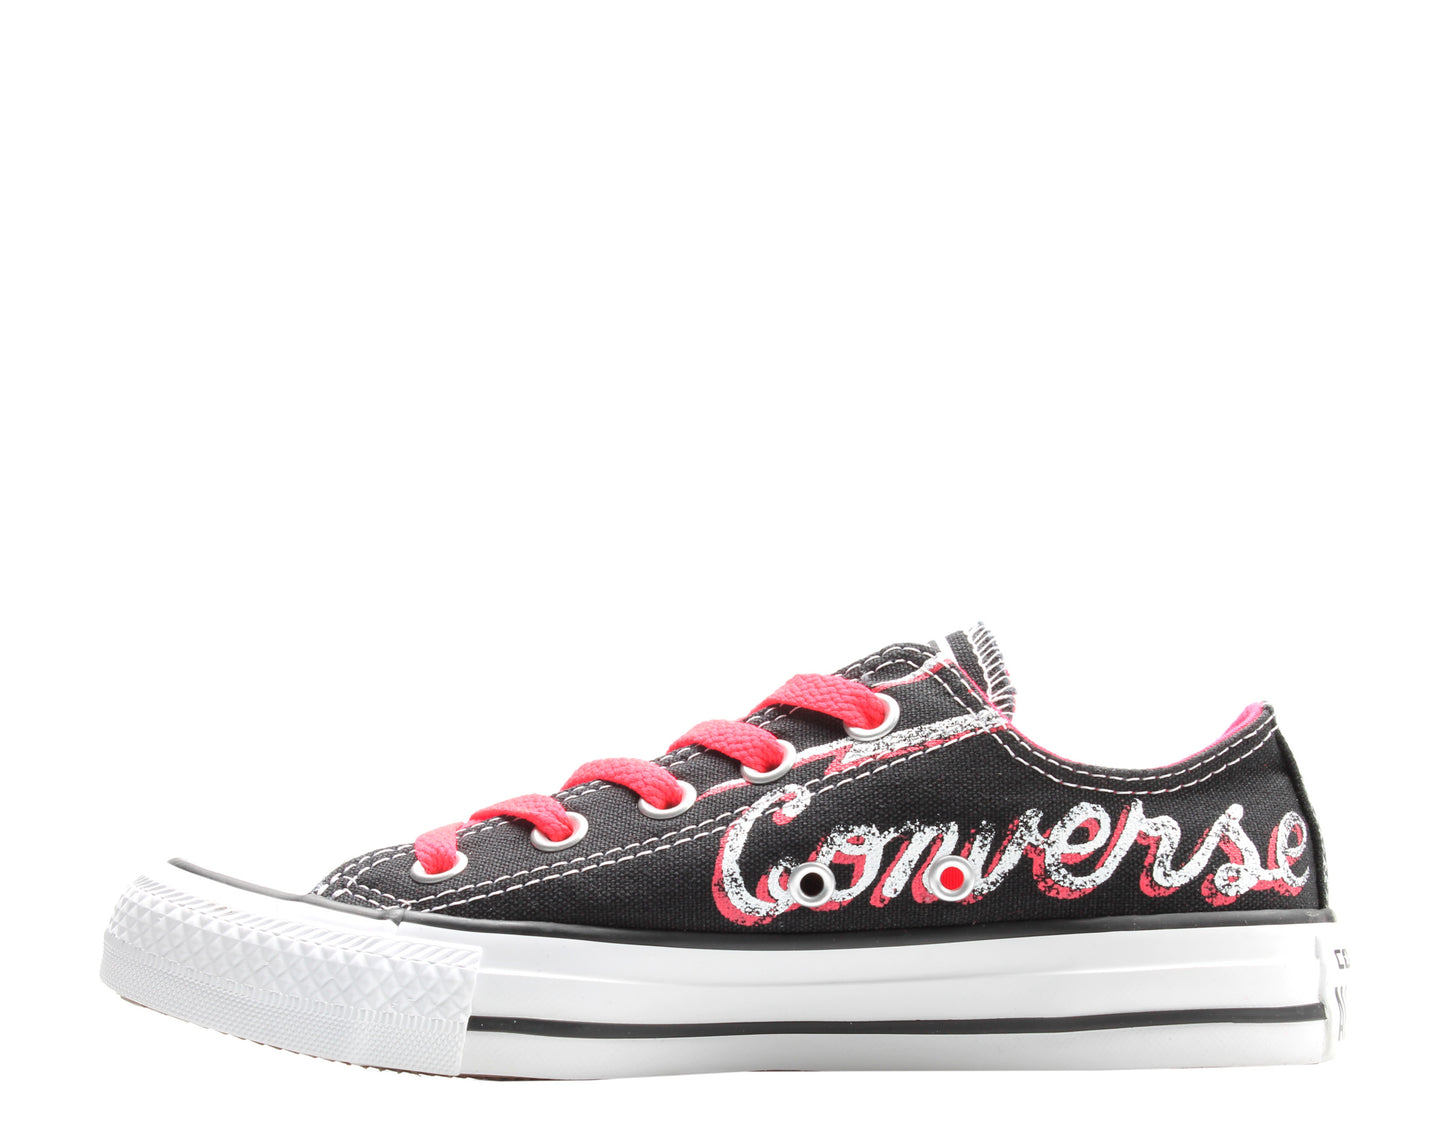 Converse Chuck Taylor All Star Ox Branded Low Top Sneakers